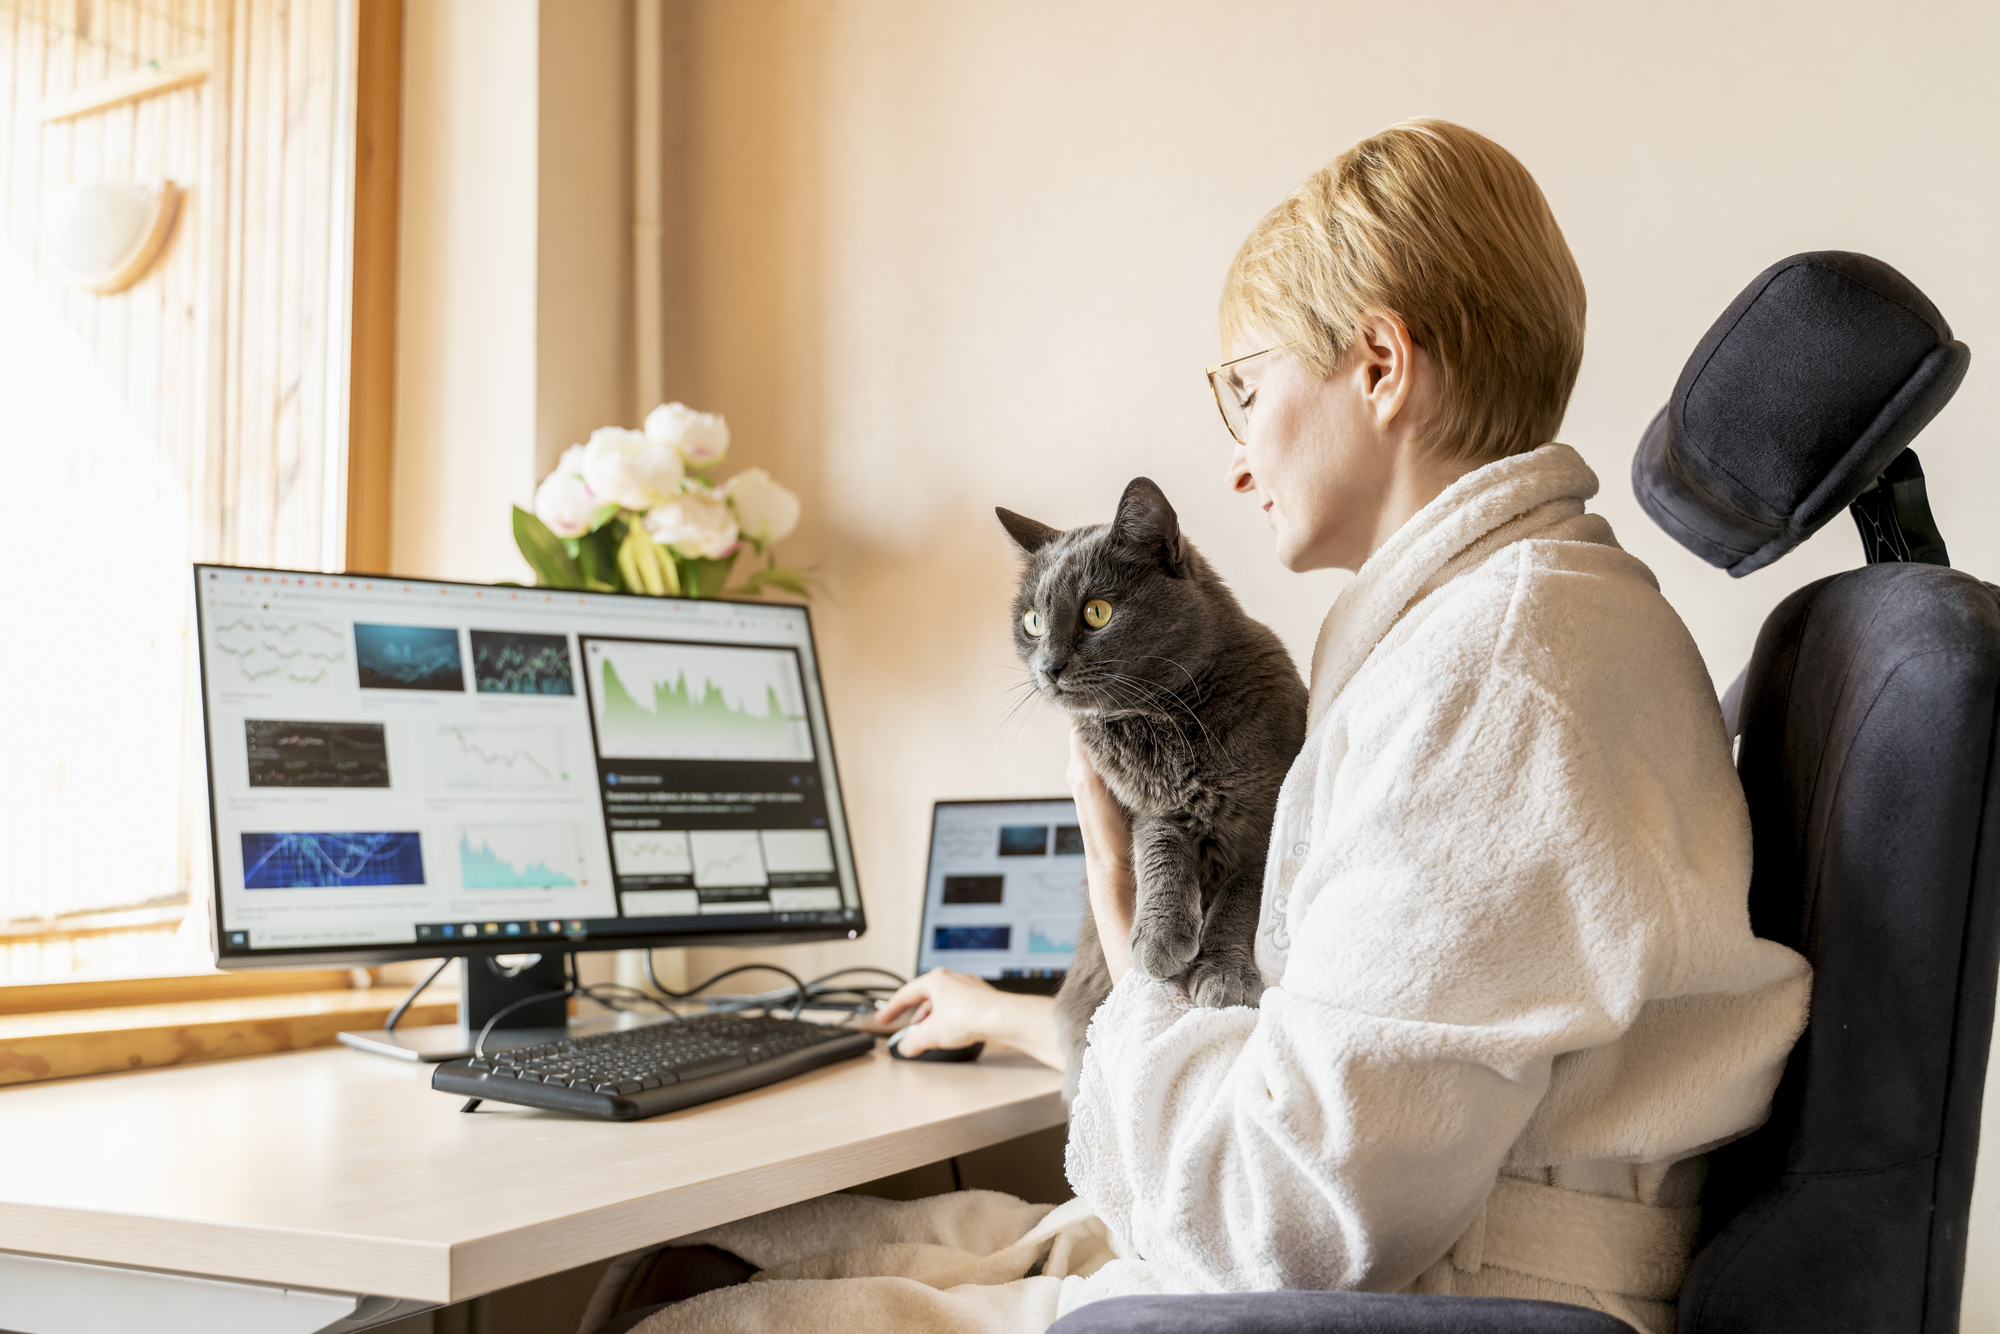 Cat sitting with his master at working place with IT equipment at home. He is disturbing woman while her work on computer. Quarantine isolation.